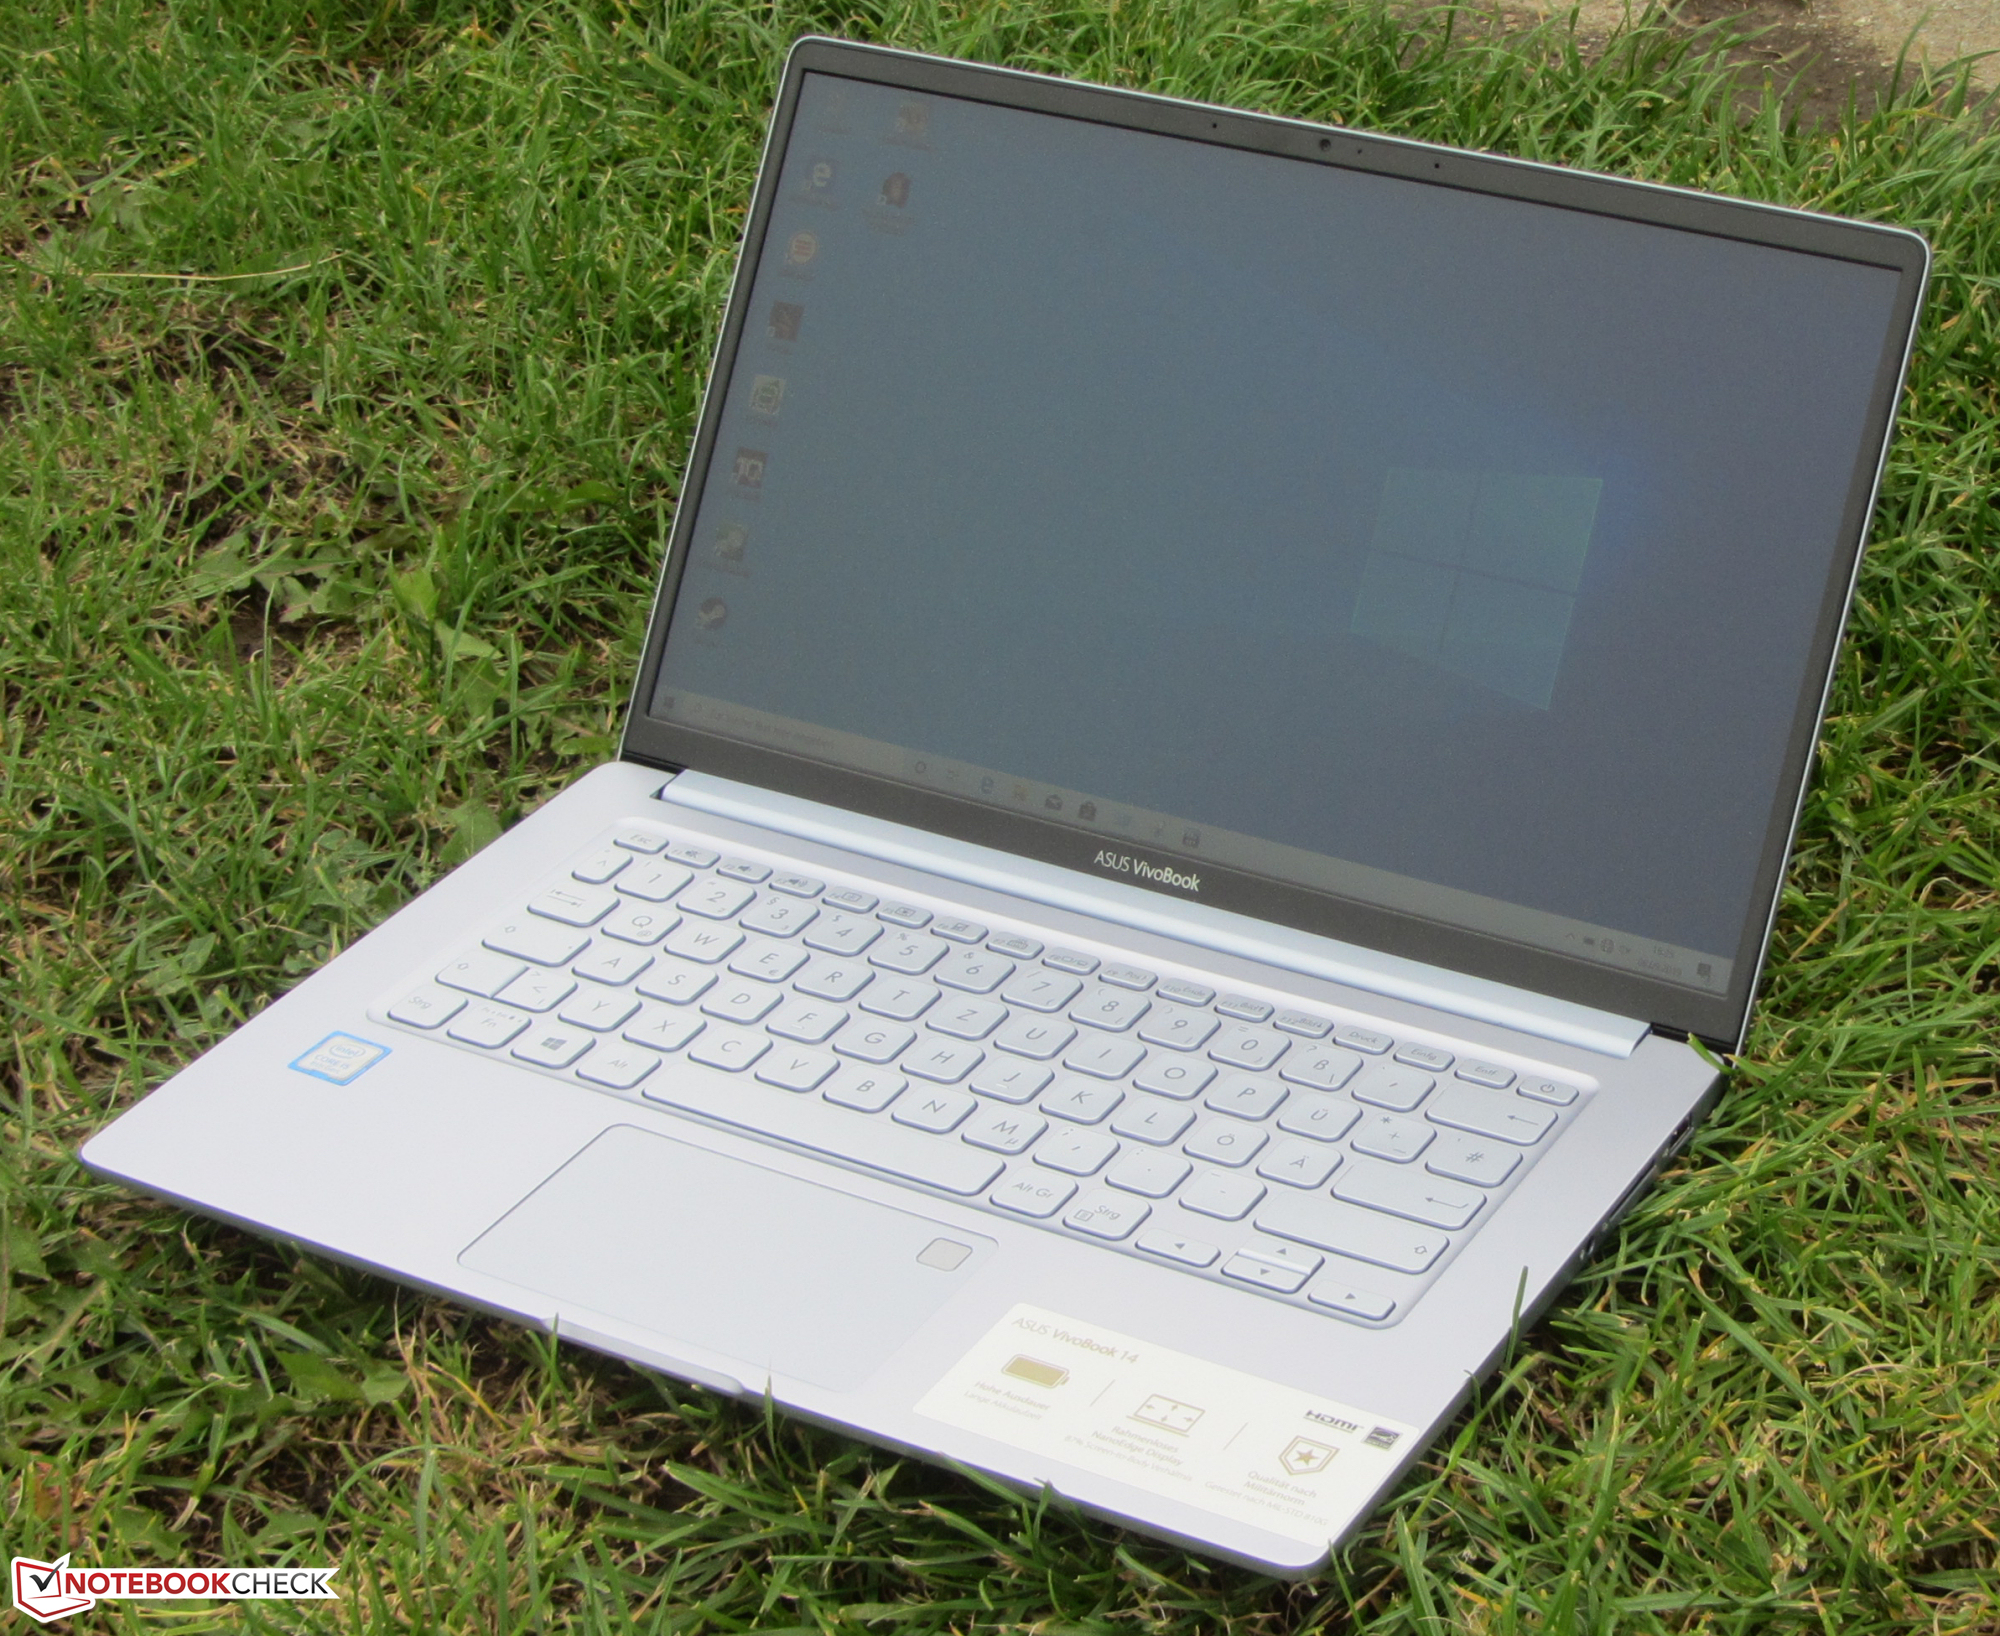 Asus Vivobook 14 X403fa Review The Elegant Subnotebook Offers A Lot Of Endurance Notebookcheck Net Reviews